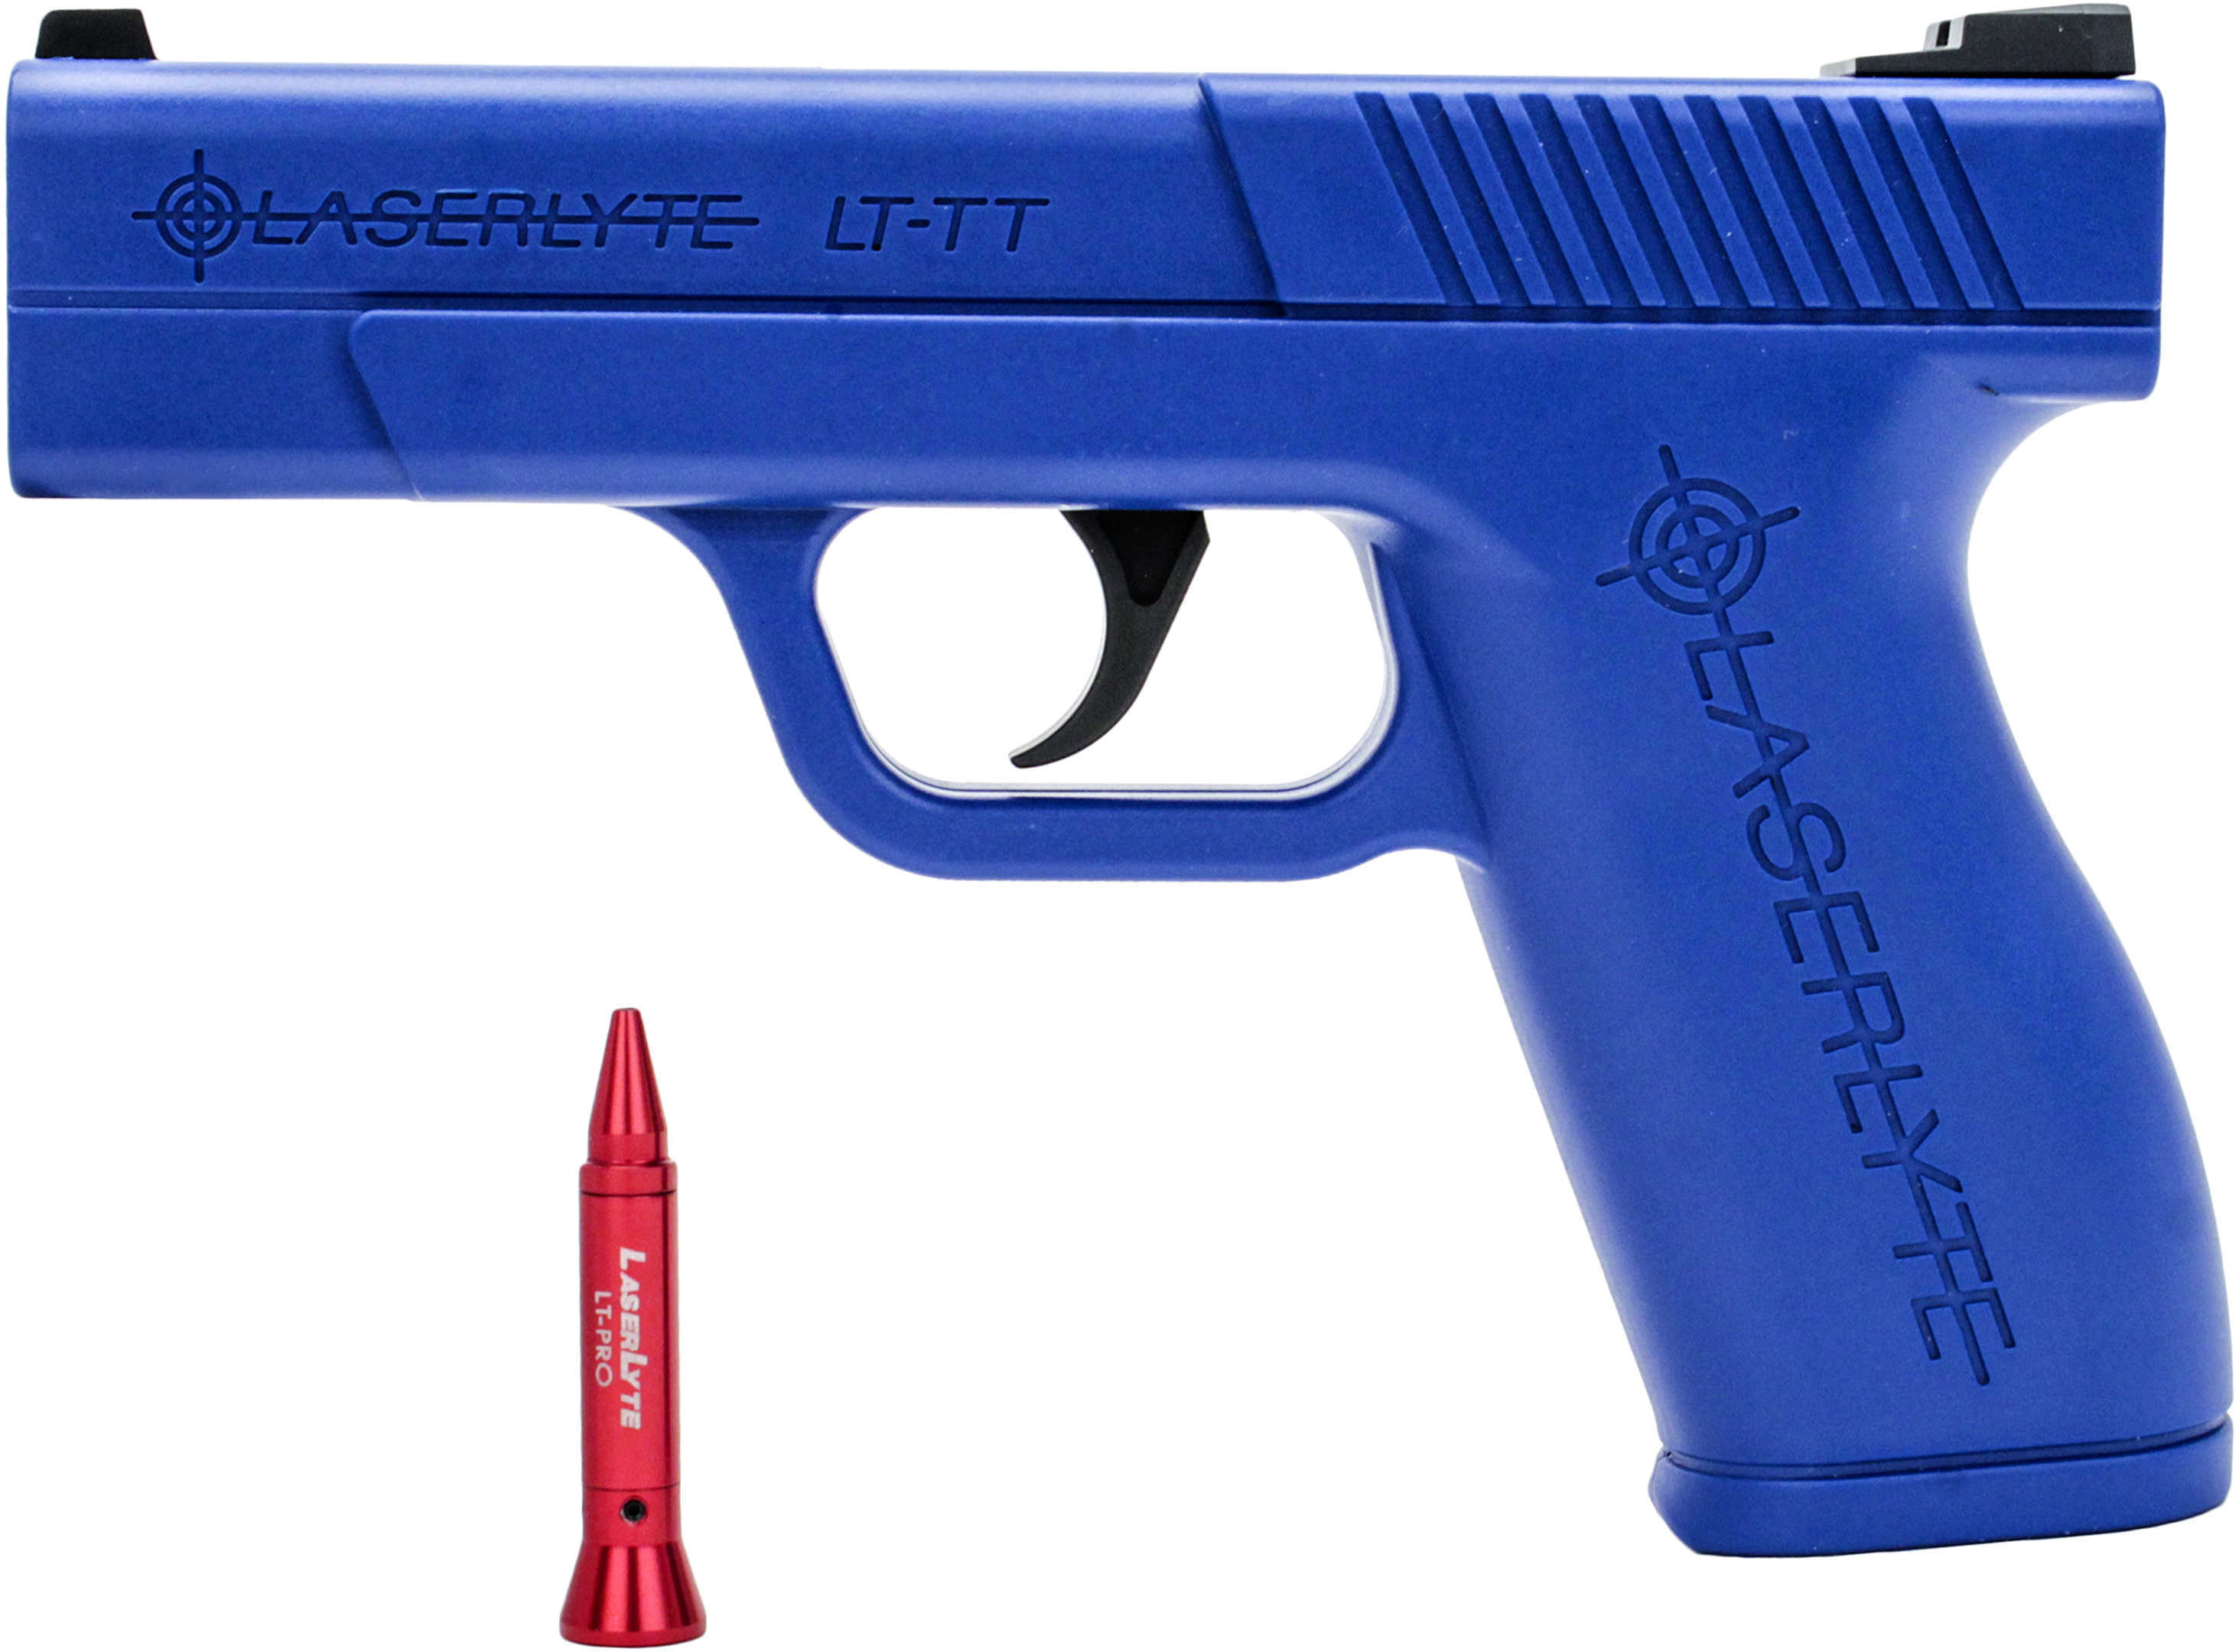 Laserlyte Trigger Tyme Pro Kit Training Includes Pistol And Lt-TTP